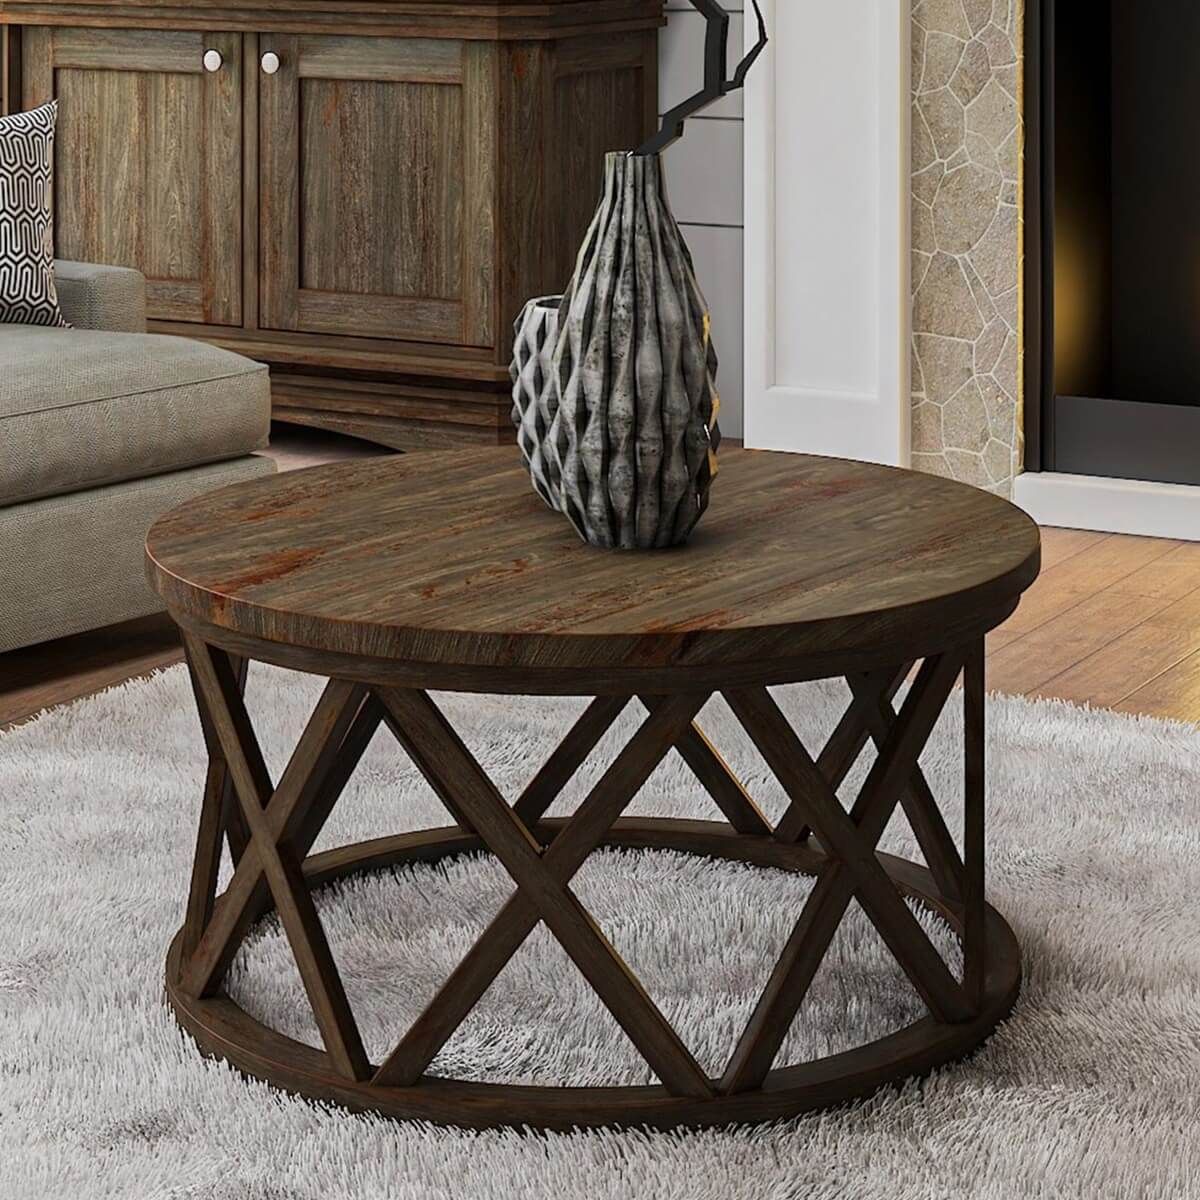 Mariefred Rustic Transitional Style Teak Wood Round Coffee Table In Rustic Round Coffee Tables (View 8 of 20)